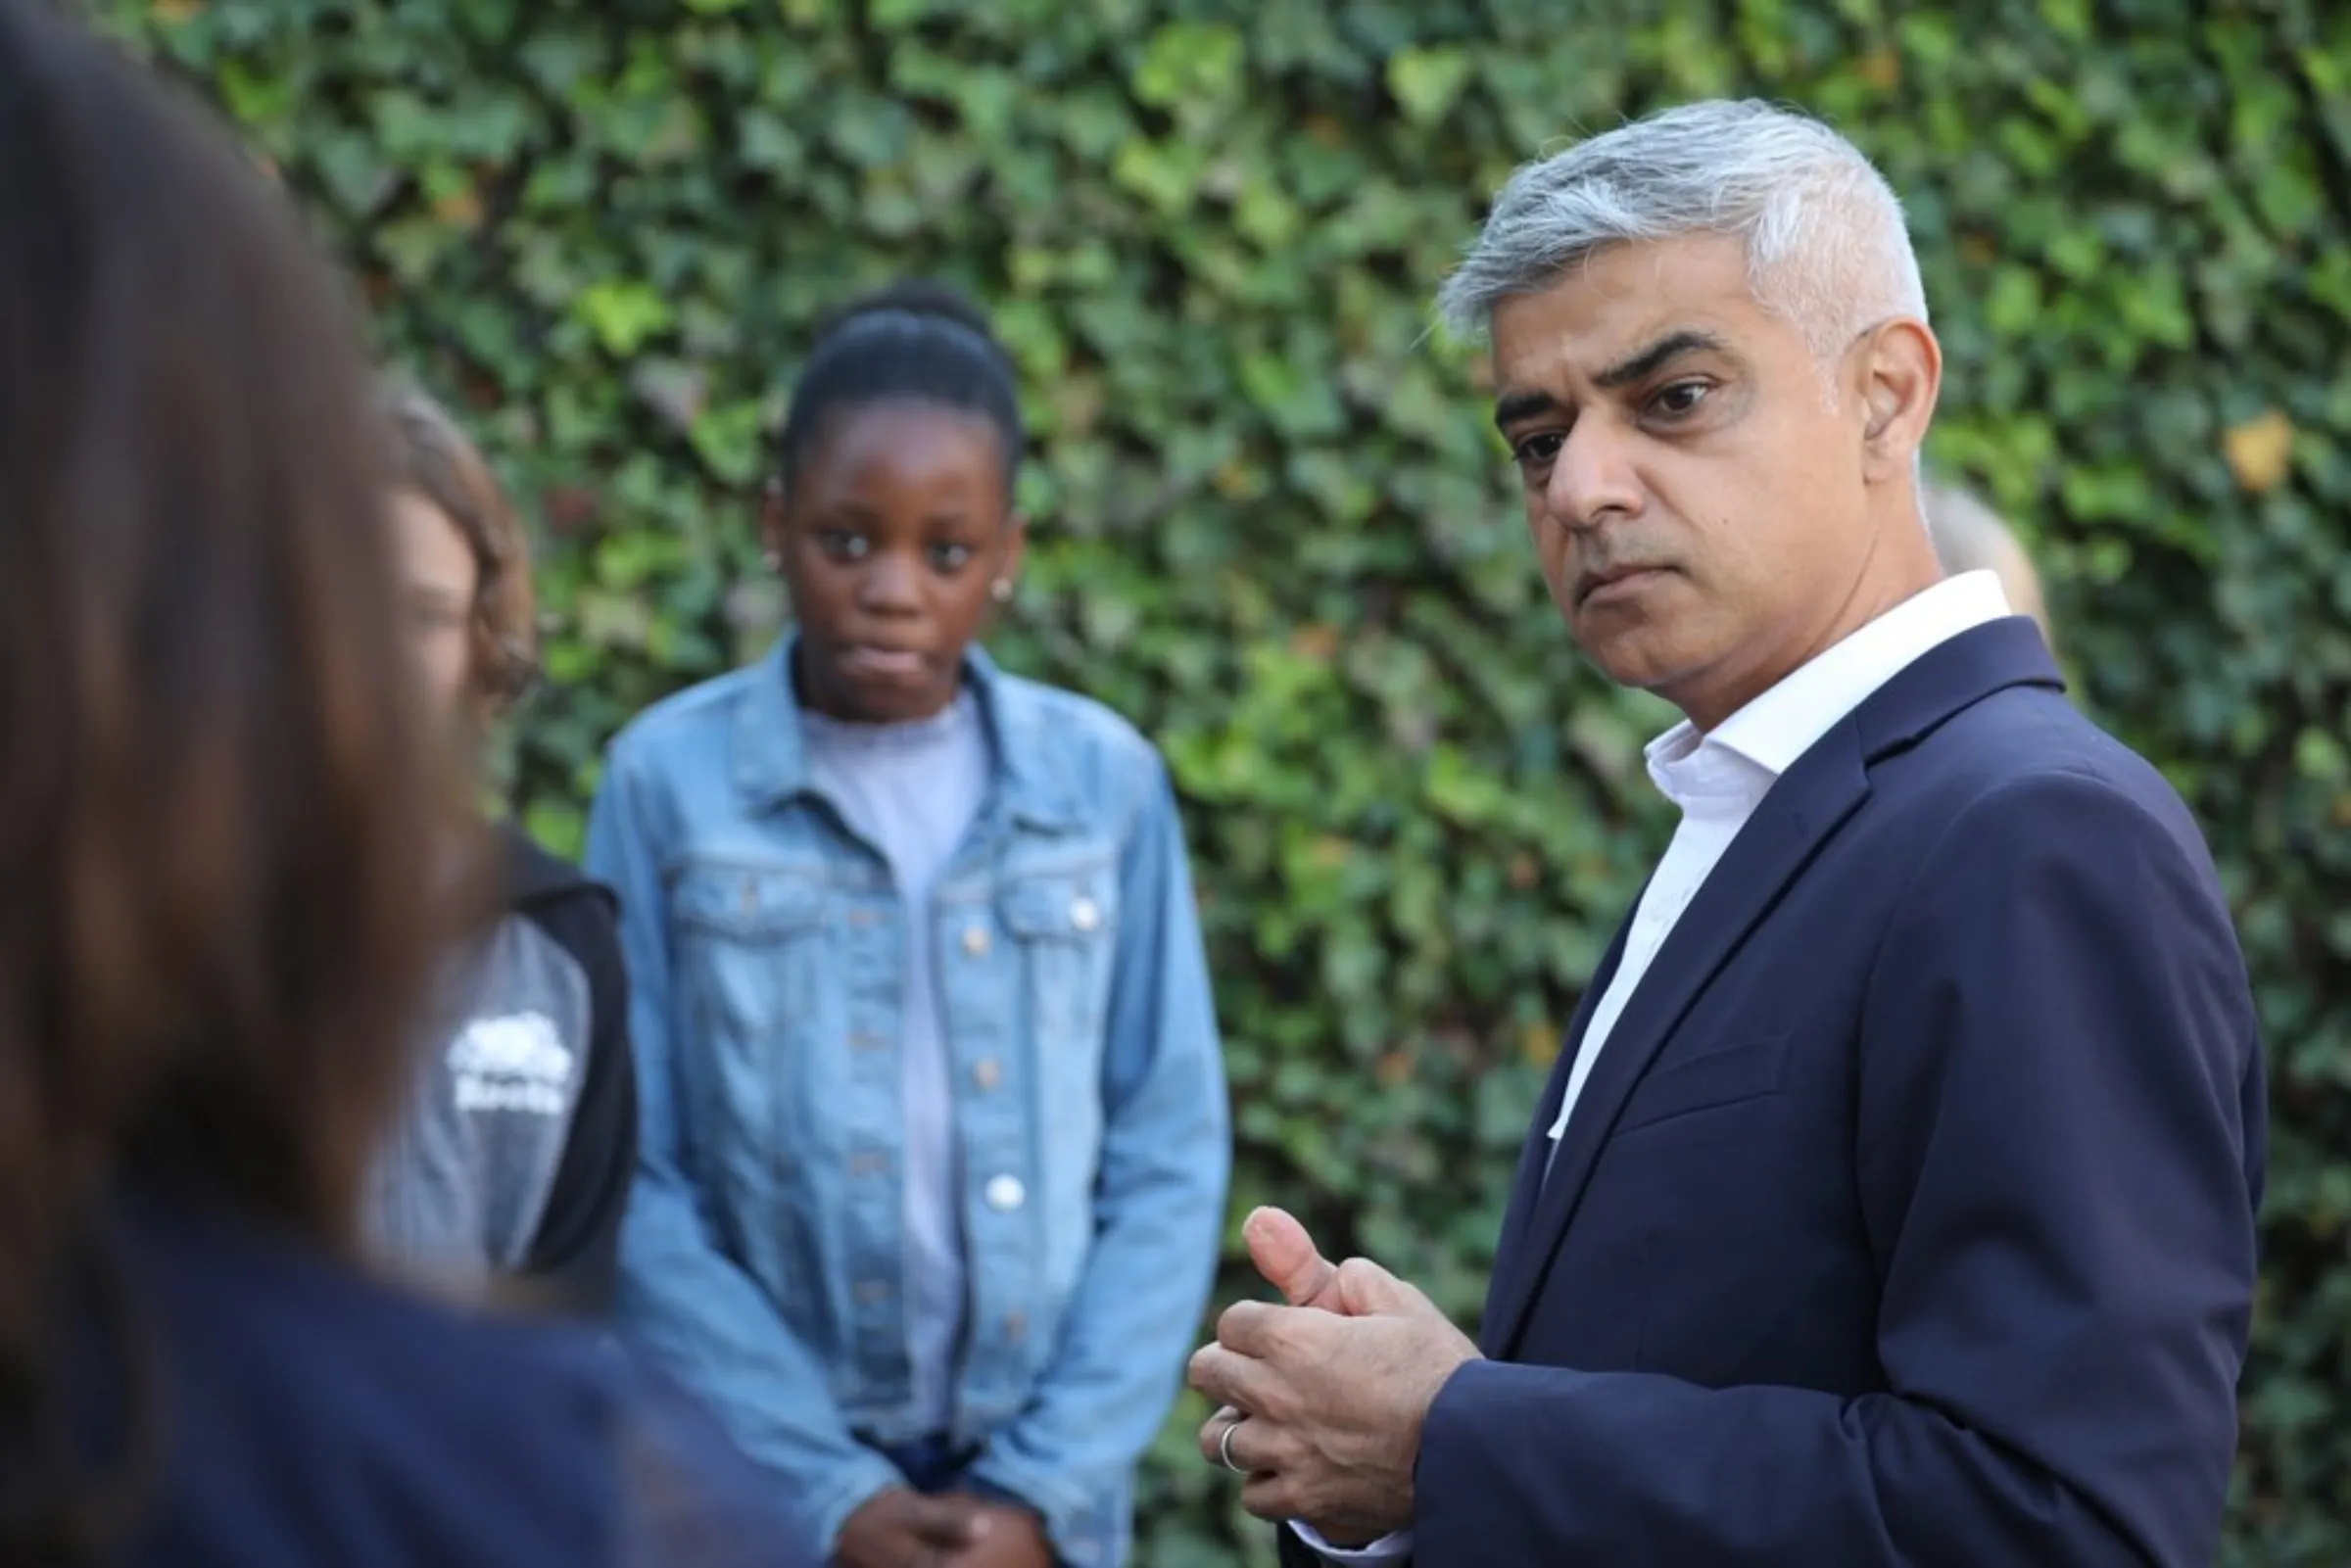 London Mayor Sadiq Khan speaks to students and staff at Prior Weston Primary School in London, England, on September 23 2021